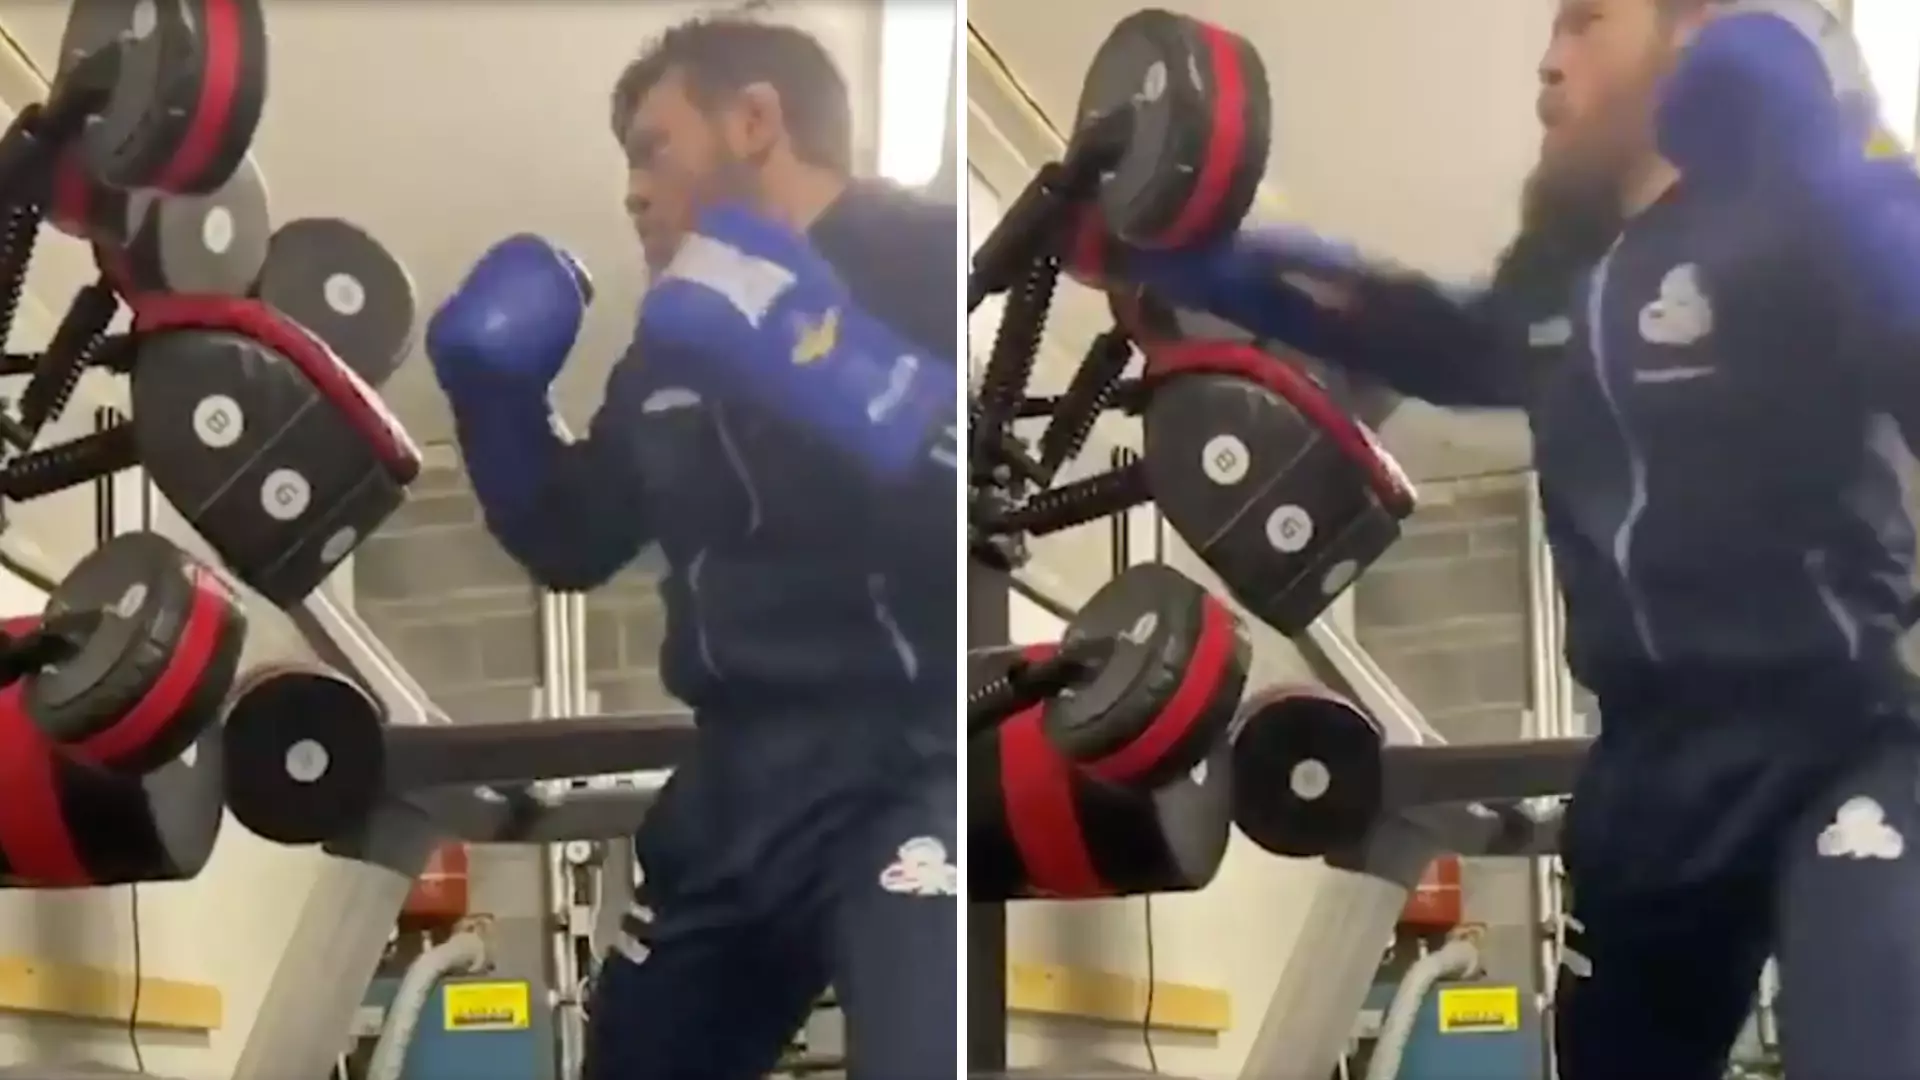 Conor McGregor Looks In 'Unstoppable Form' After Posting New Training Video During Coronavirus Crisis